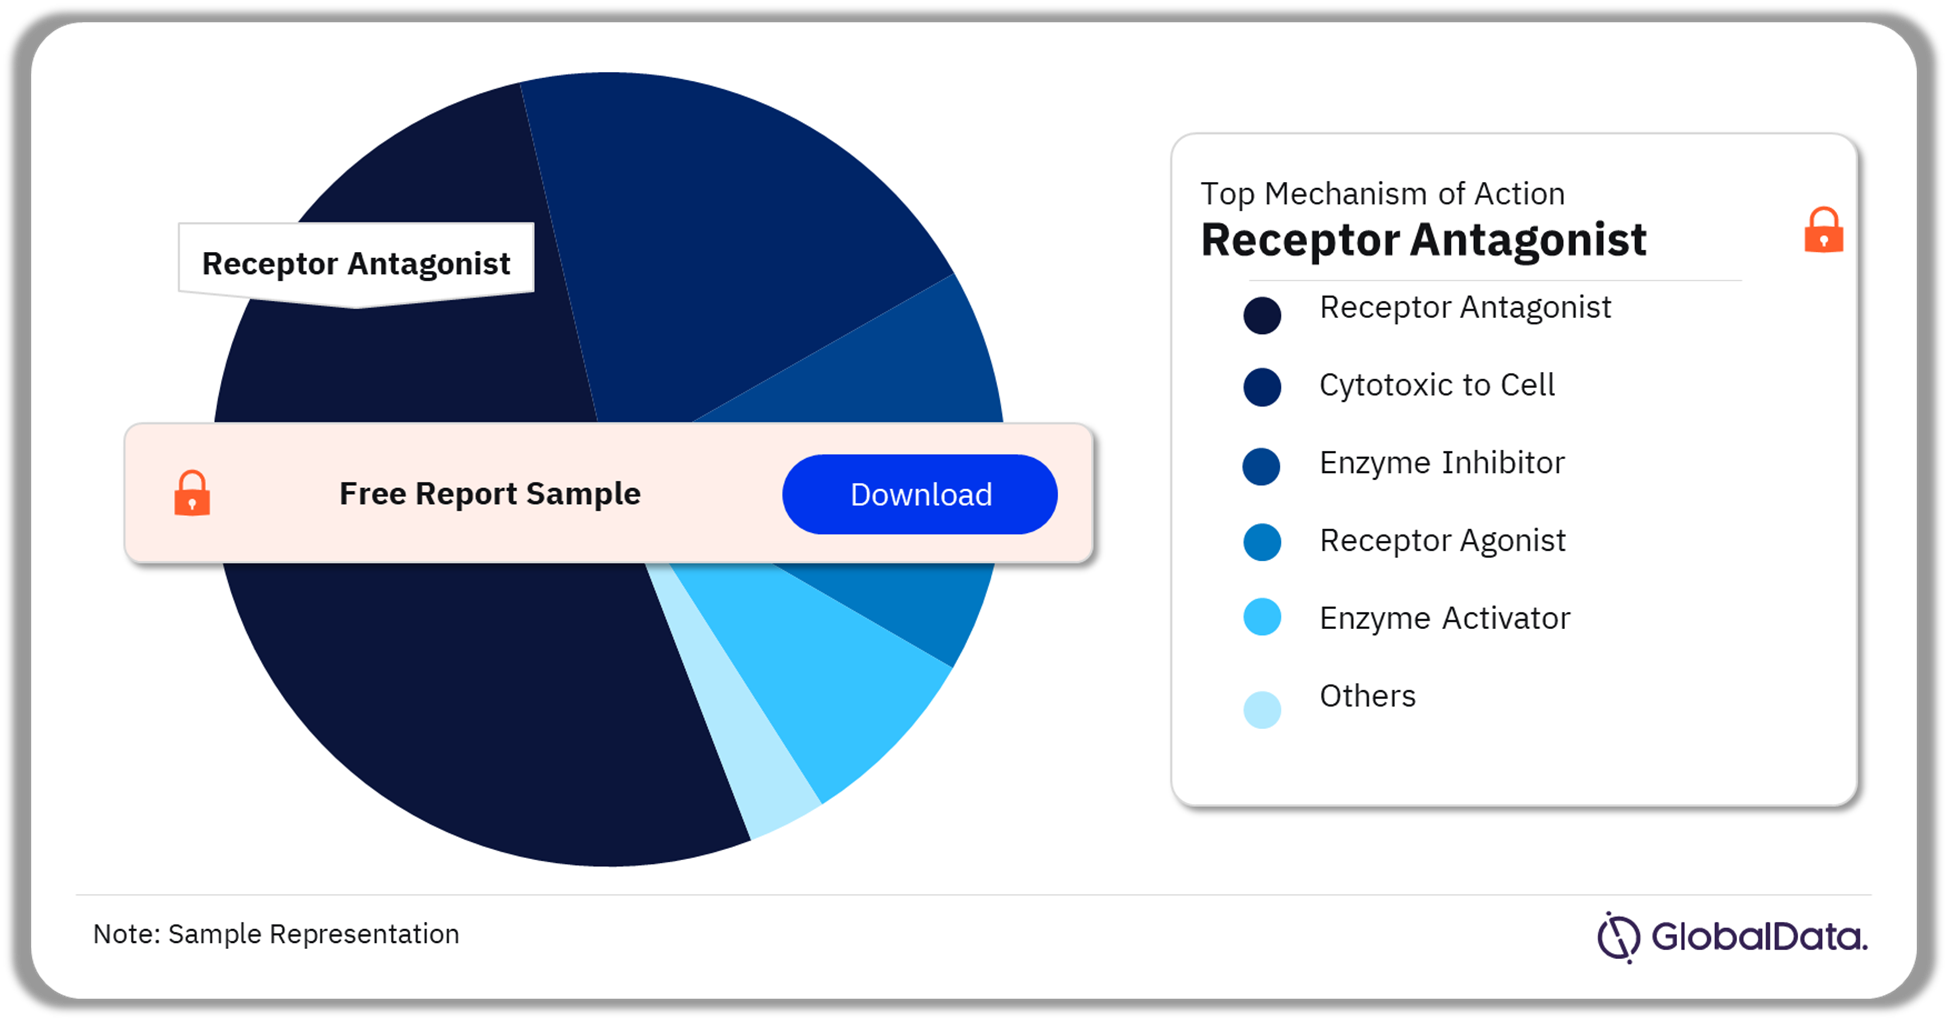 Anal Cancer Pipeline Drugs Market Analysis by Mechanisms of Action, 2023 (%)